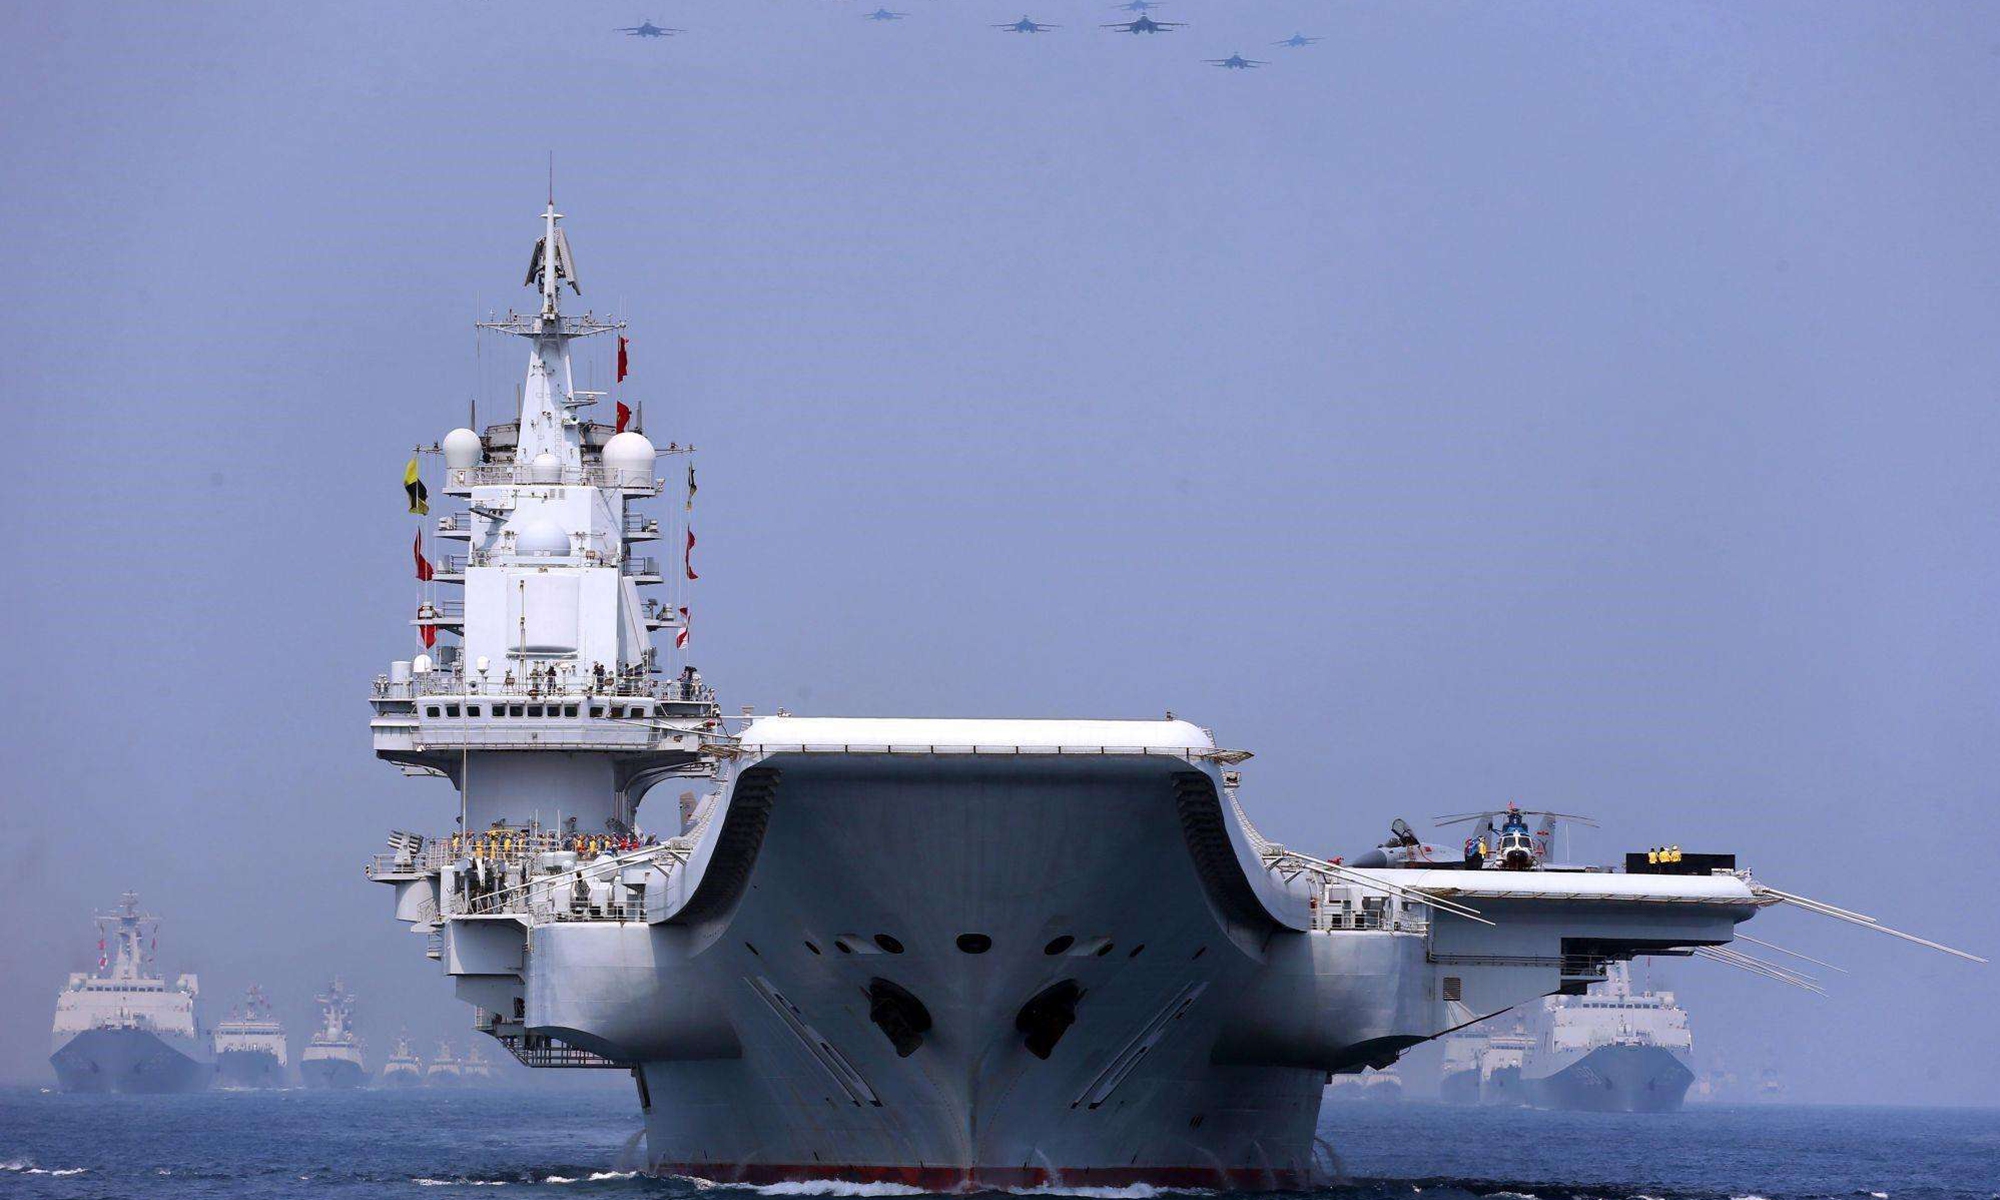 The picture shows the aircraft carrier Liaoning (Hull 16) and other vessels and fighter jets in the maritime parade conducted by the Chinese People's Liberation Army (PLA) Navy in the South China Sea on the morning of April 12, 2018.Photo:China Military